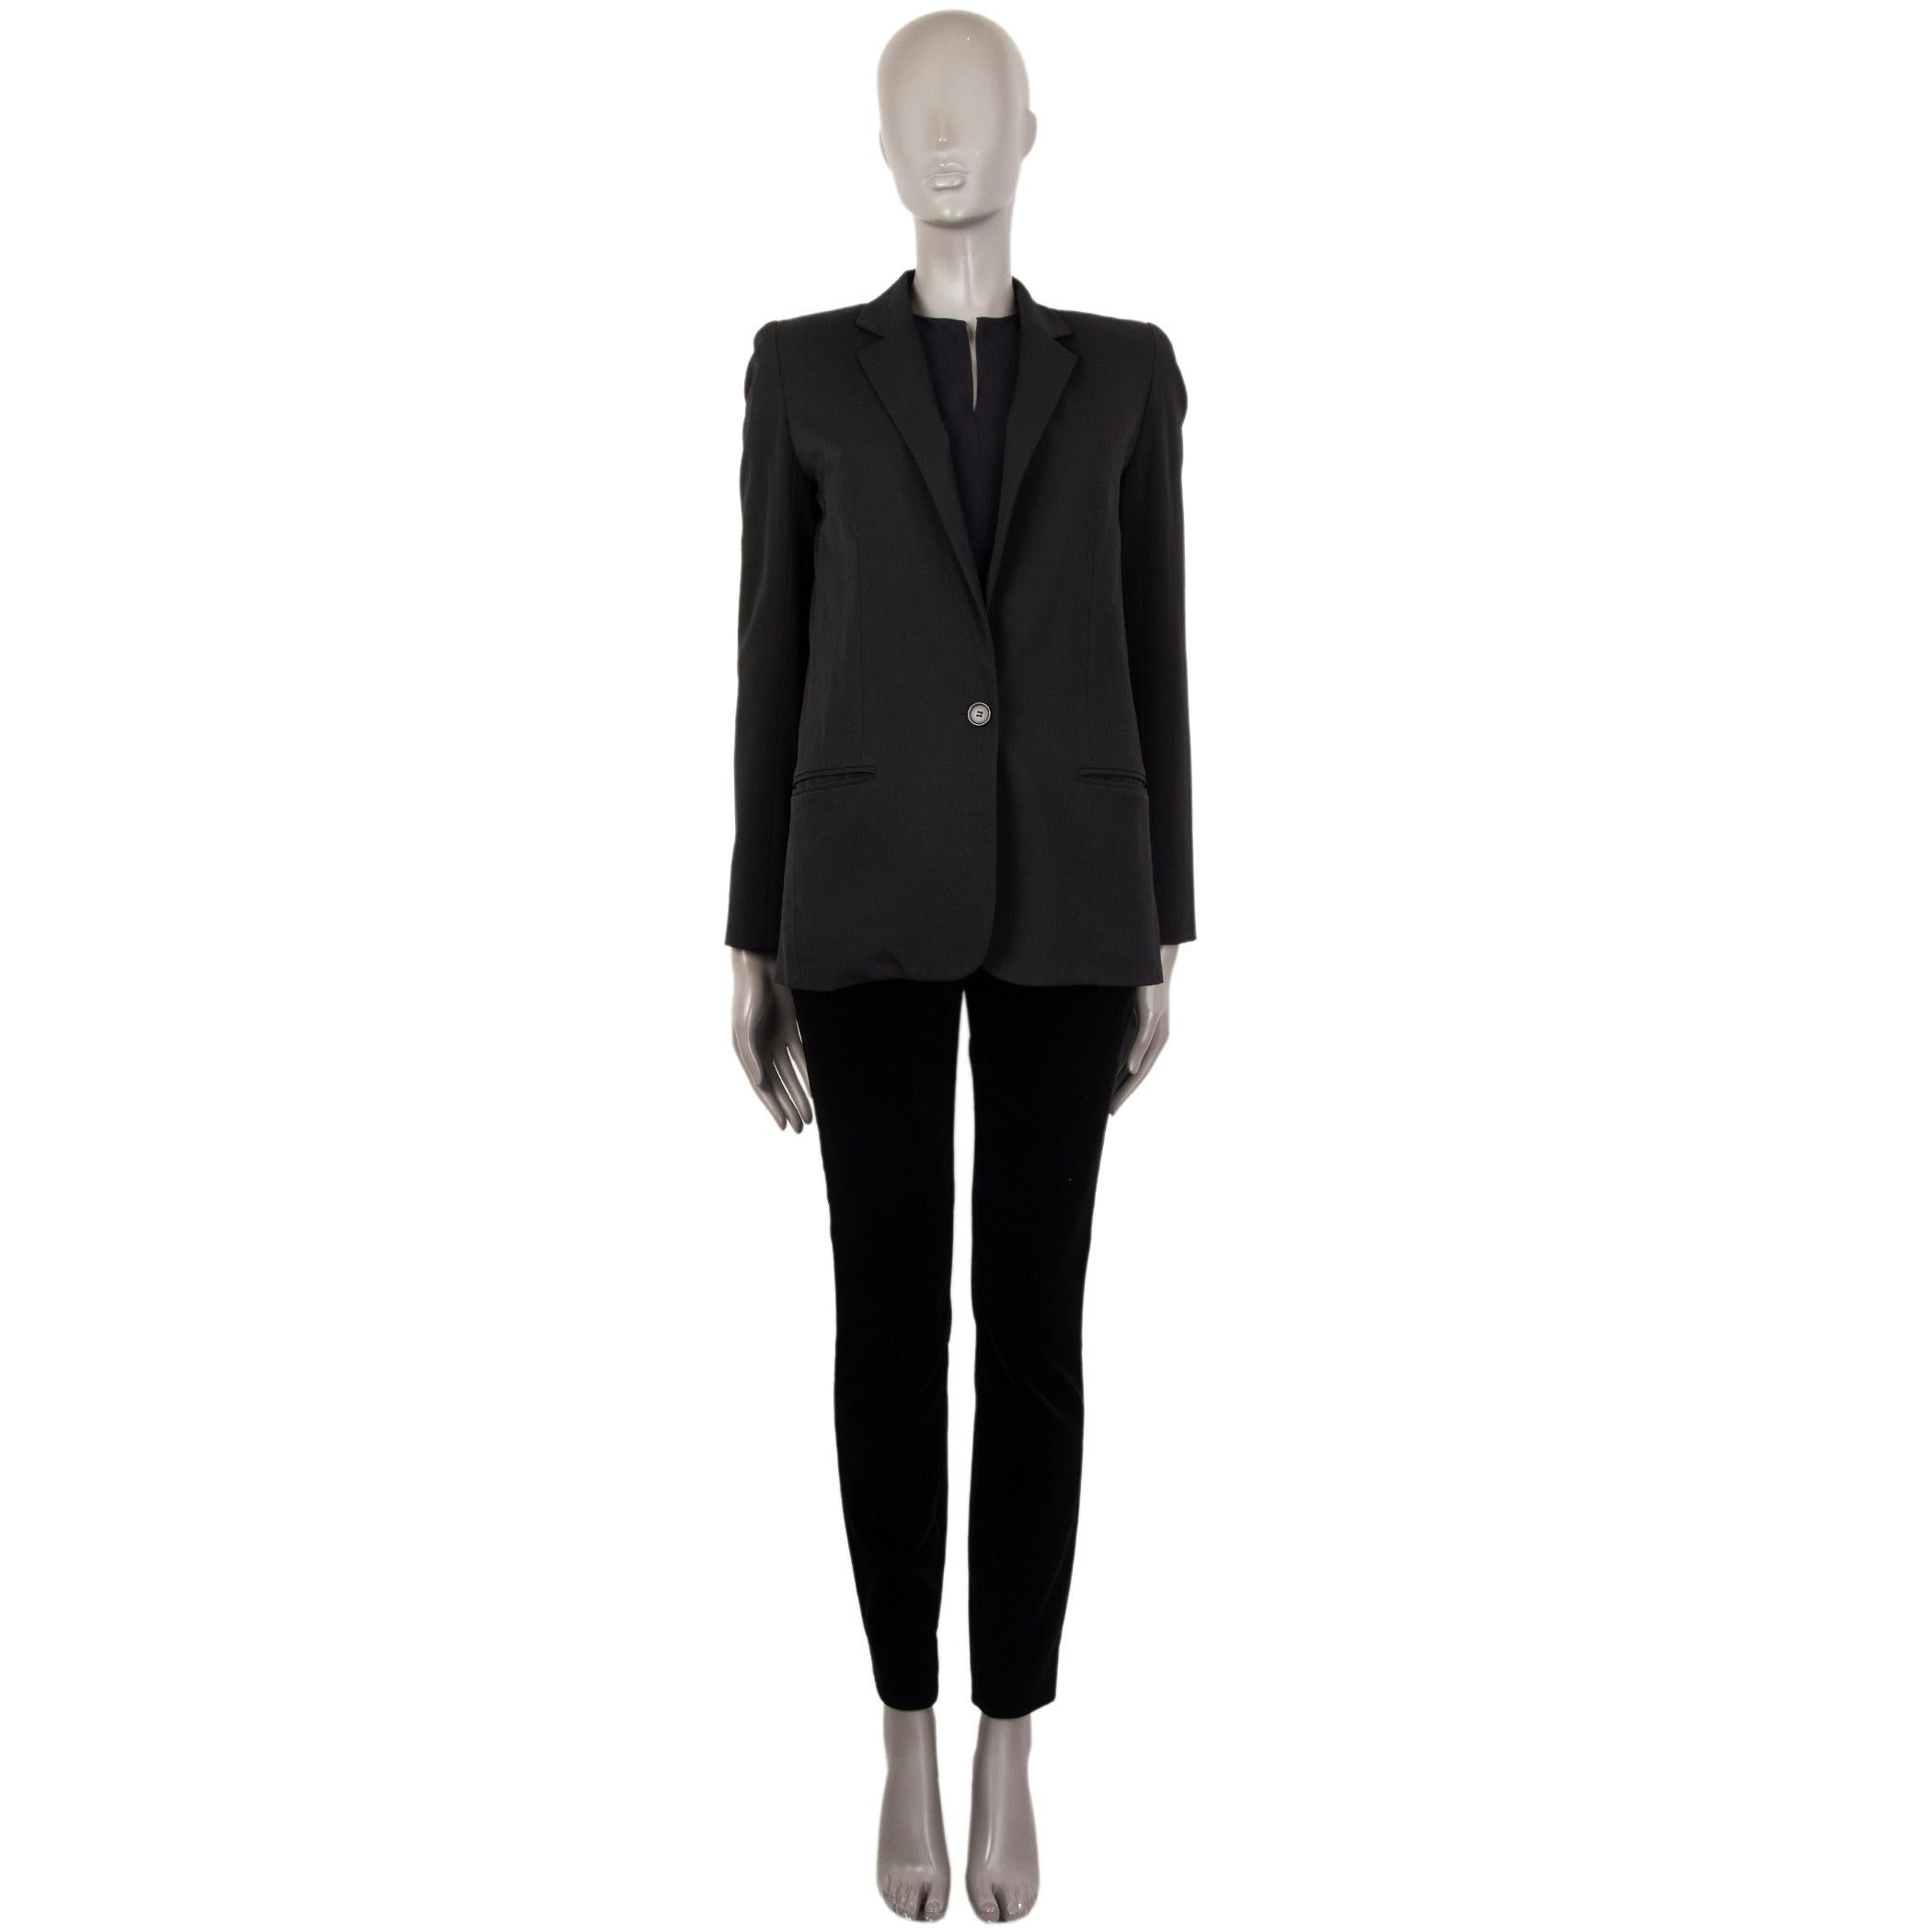 authentic Chloe classic blazer in black wool (90%), nylon (8%), and elastane (2%). With narrow notch collar, two welt pockets on the front, and three-button cuffs. Closes with one urea button on the front. Lined in black fabric. Has been worn and is